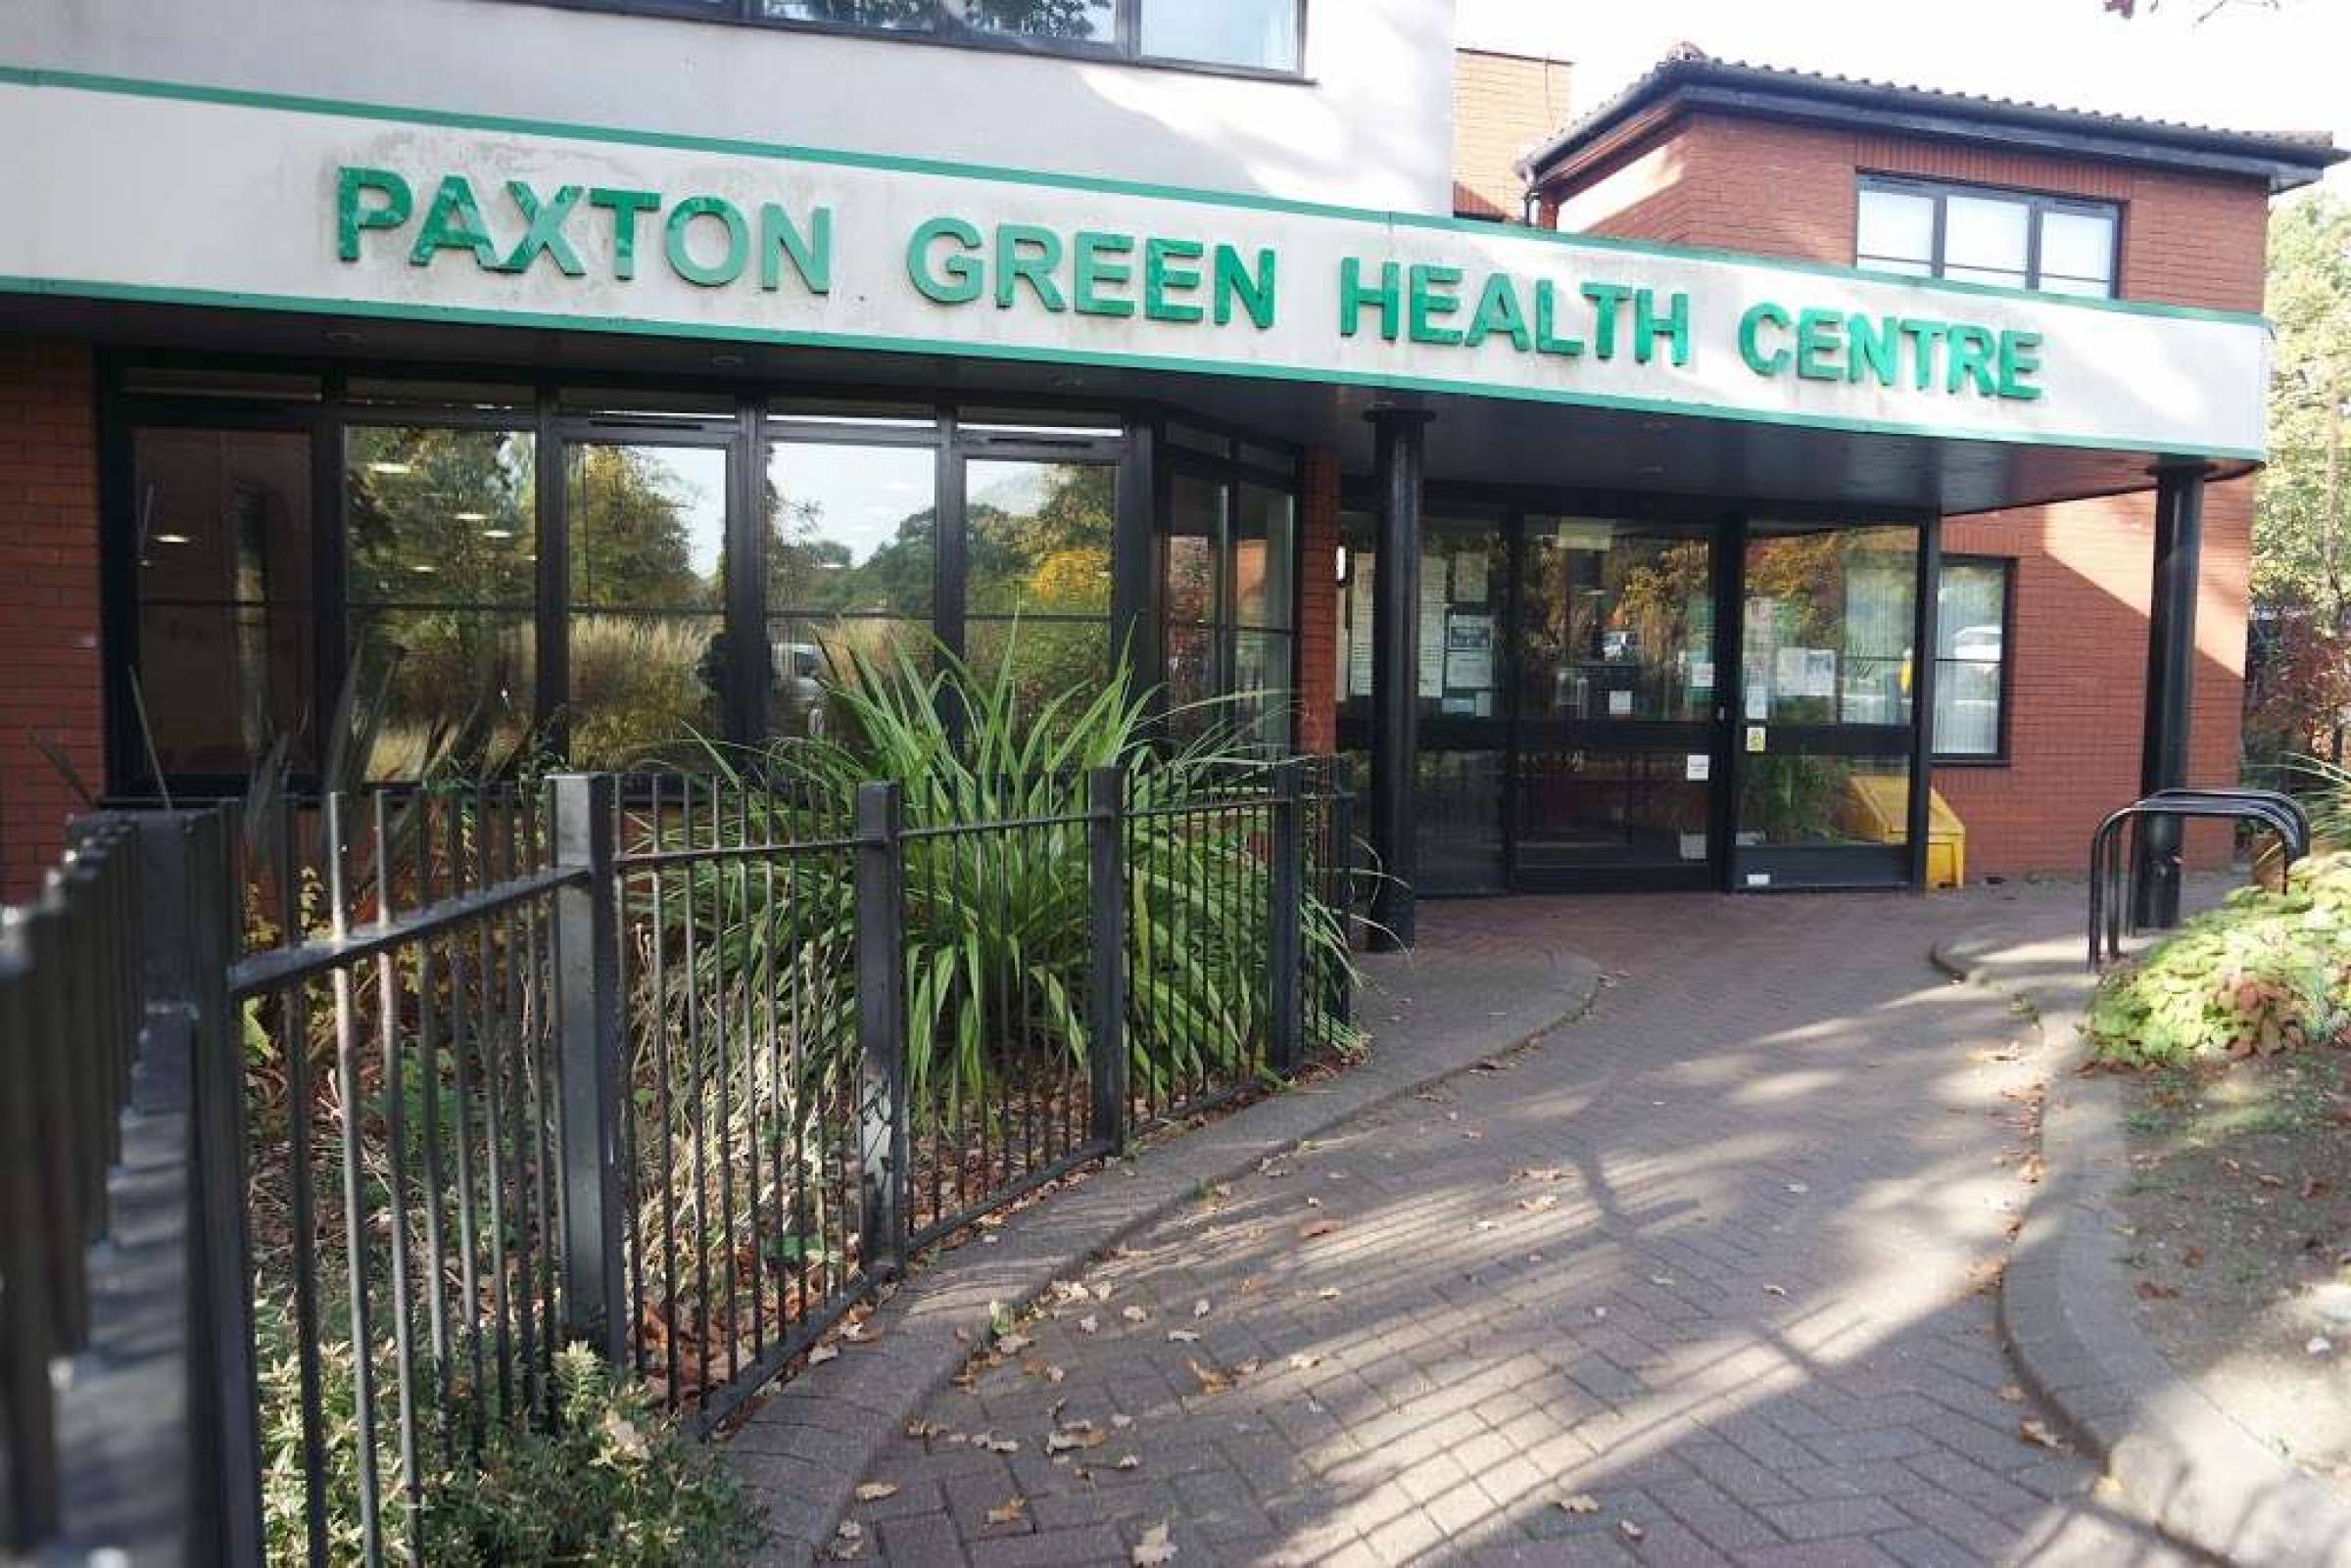 Paxton Green Health Centre Gipsy Hill, Norwood London